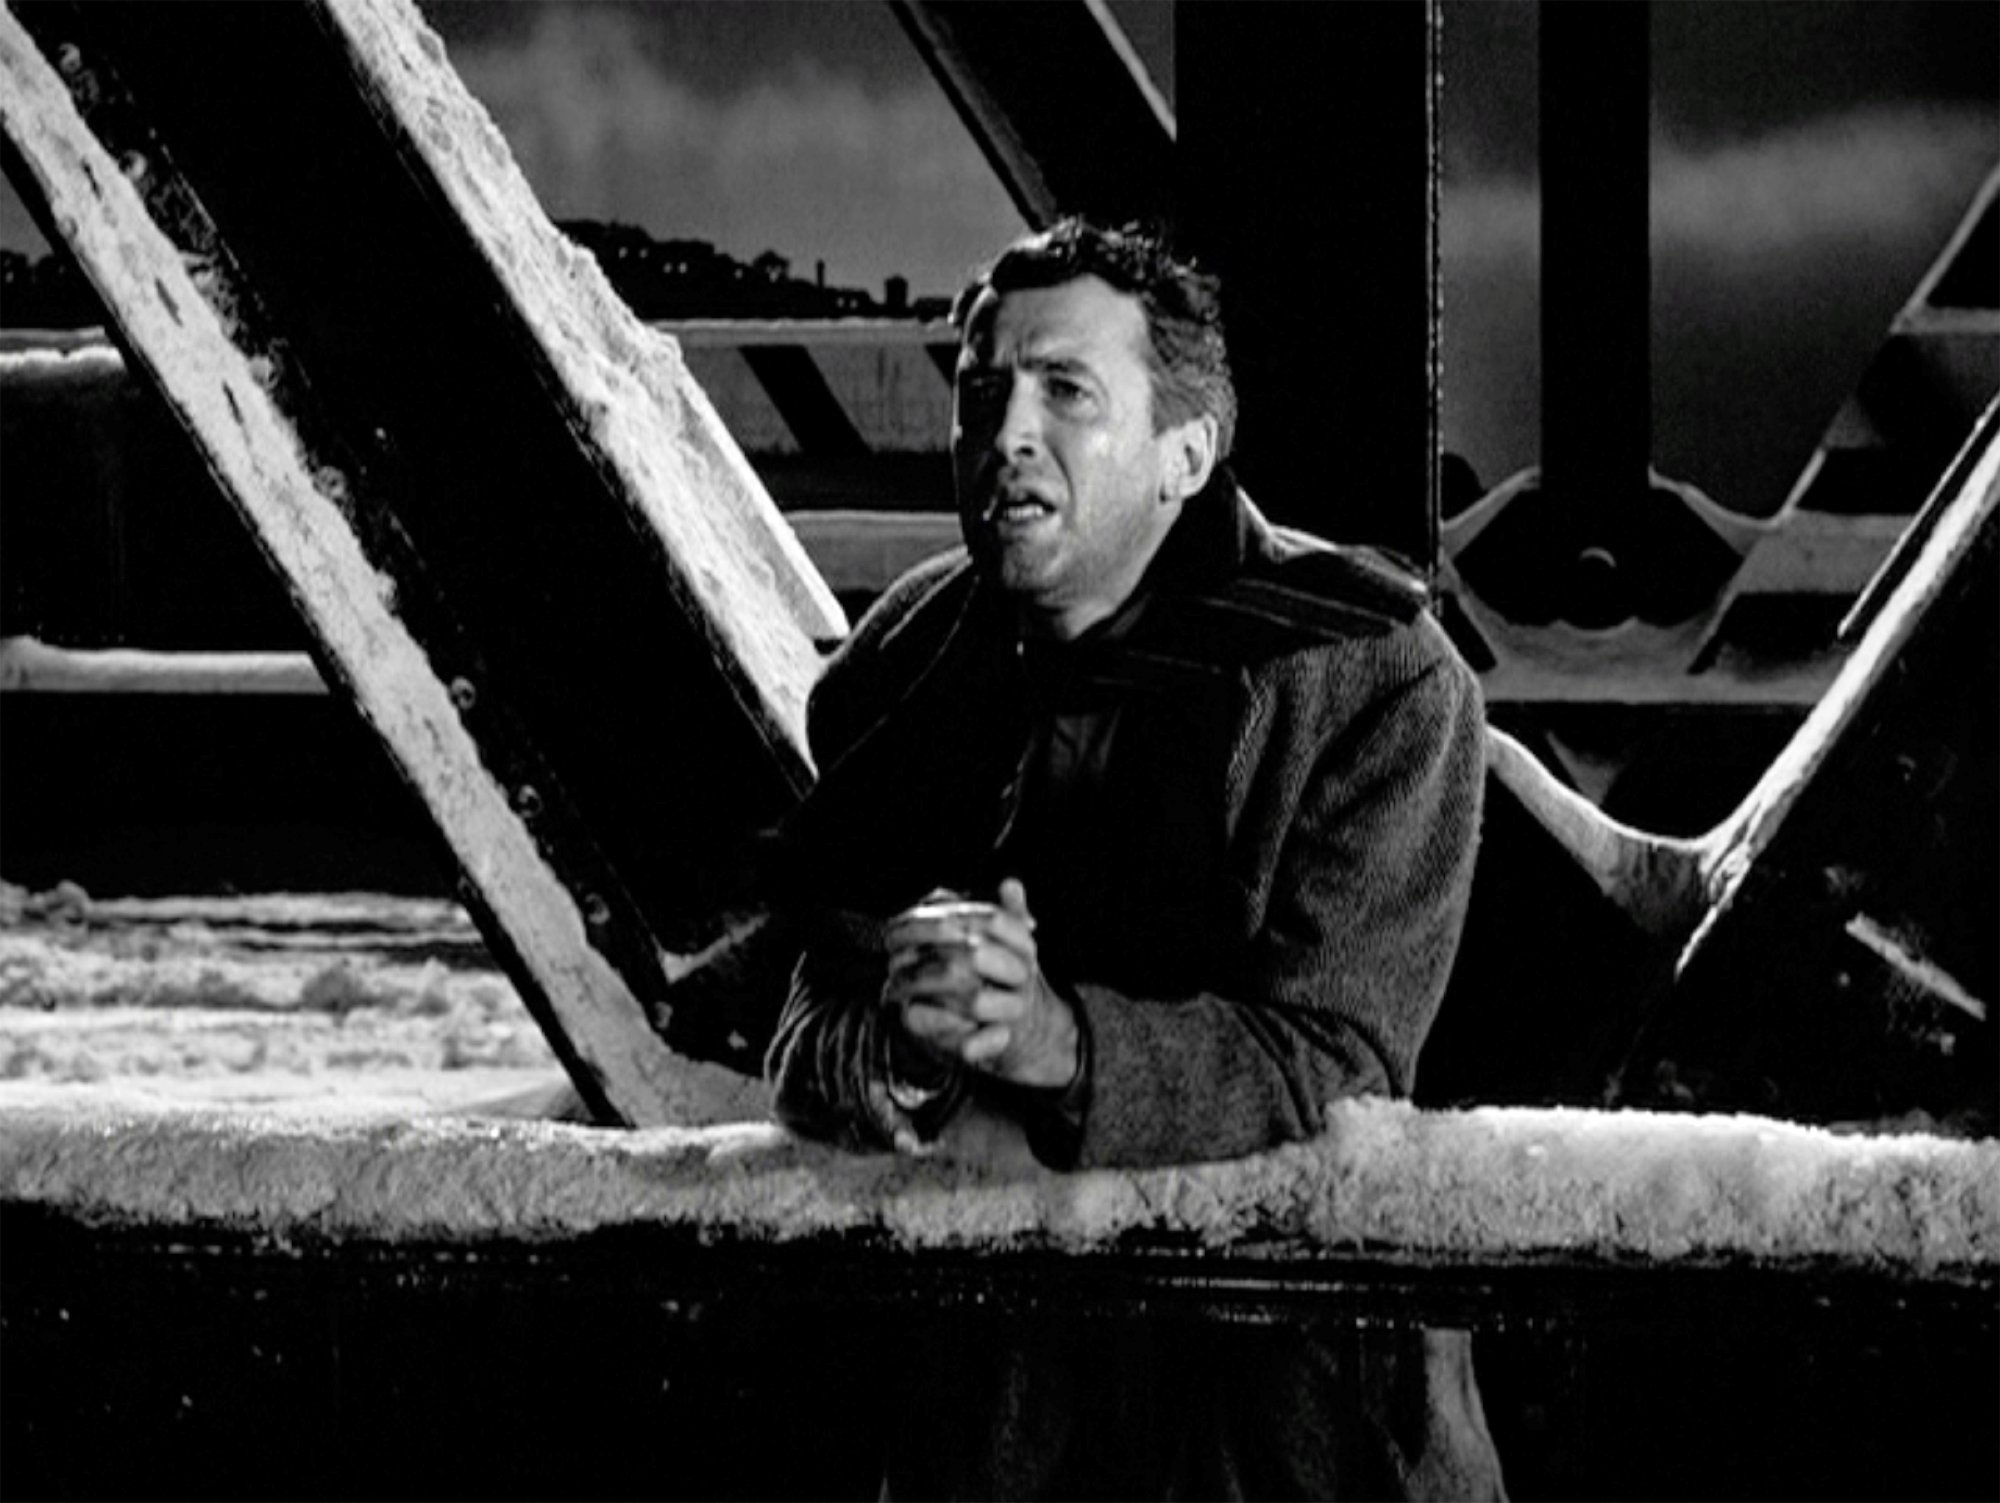 Frank Capra's 'It's a Wonderful Life' James Stewart as George Bailey clasping his hands on the bridge